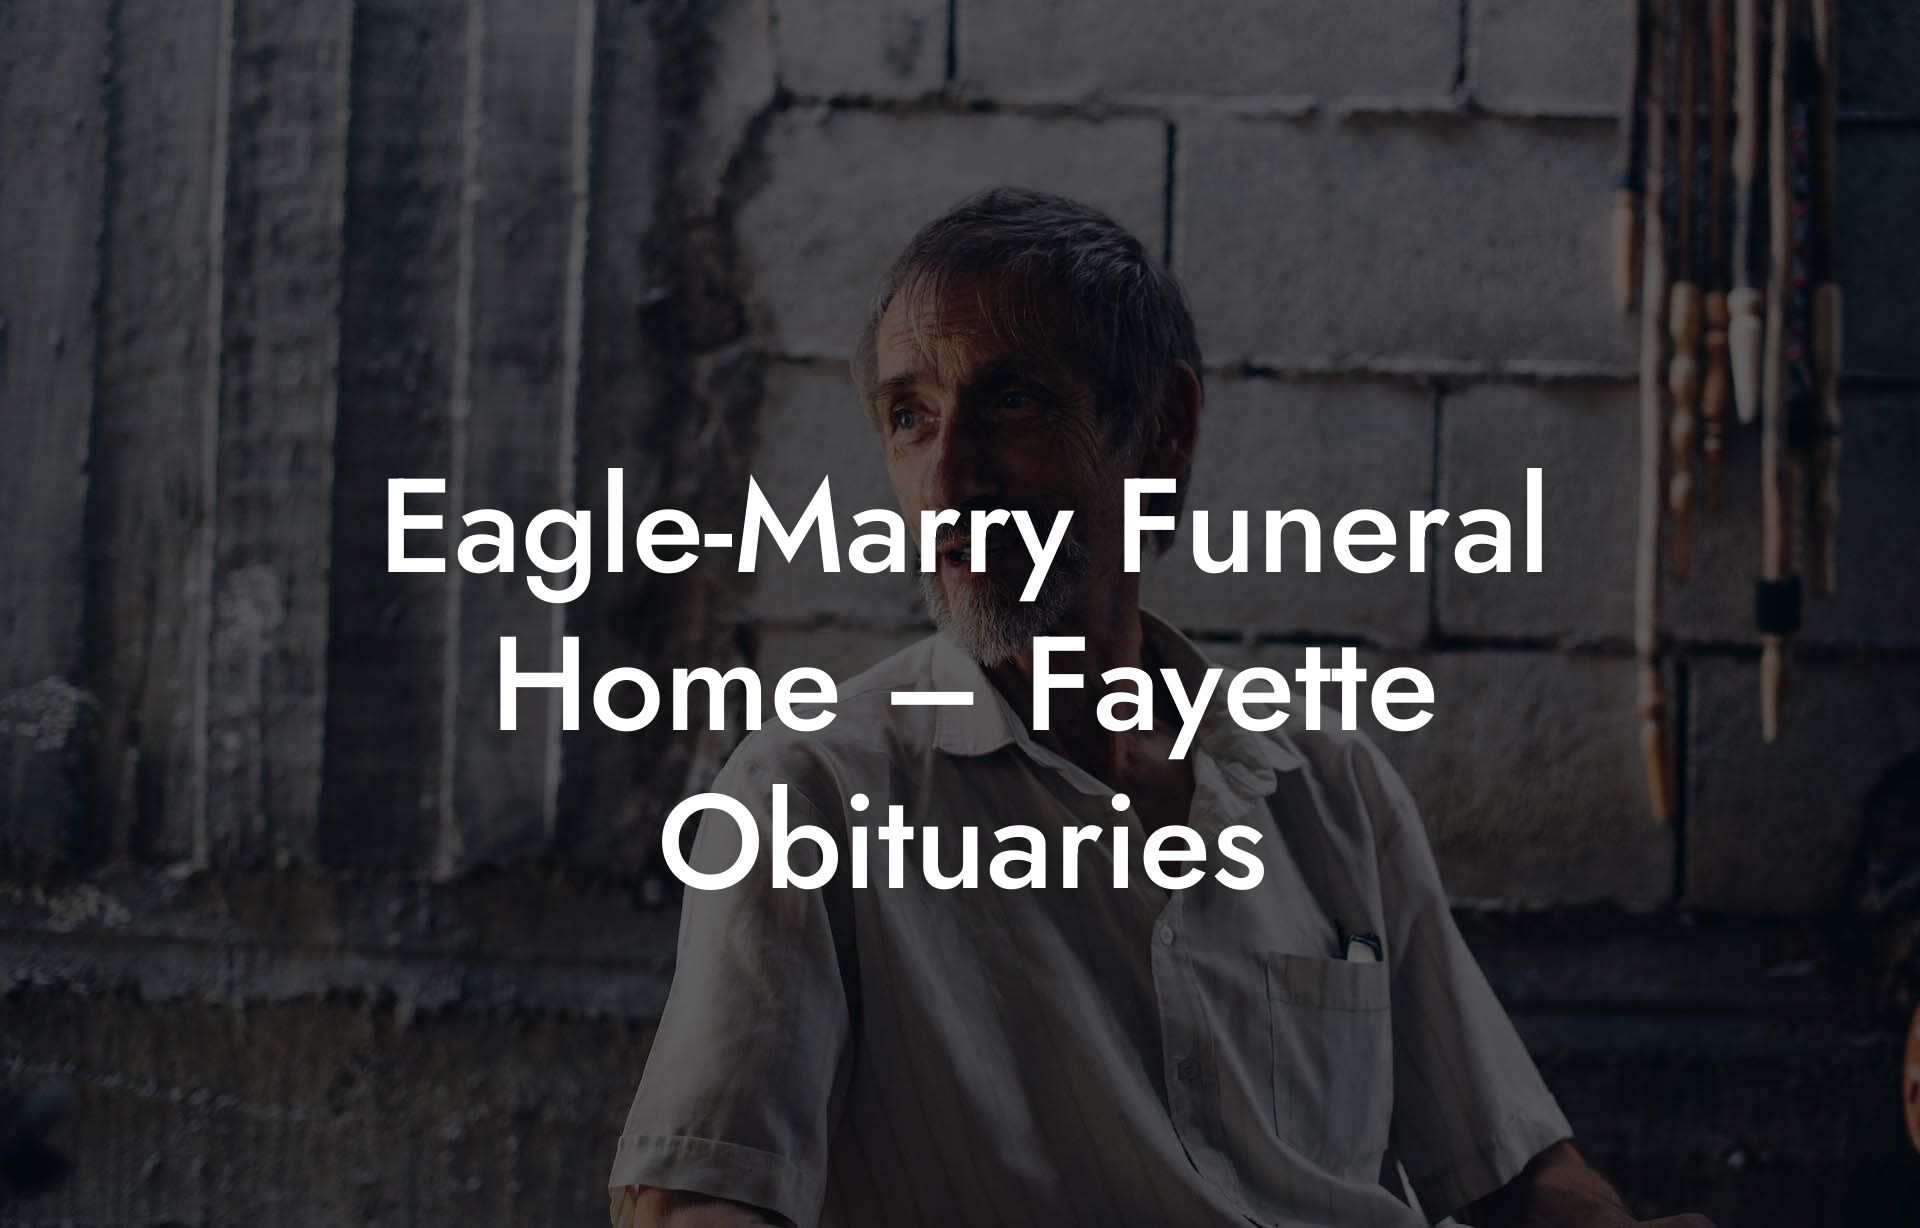 Eagle-Marry Funeral Home – Fayette Obituaries